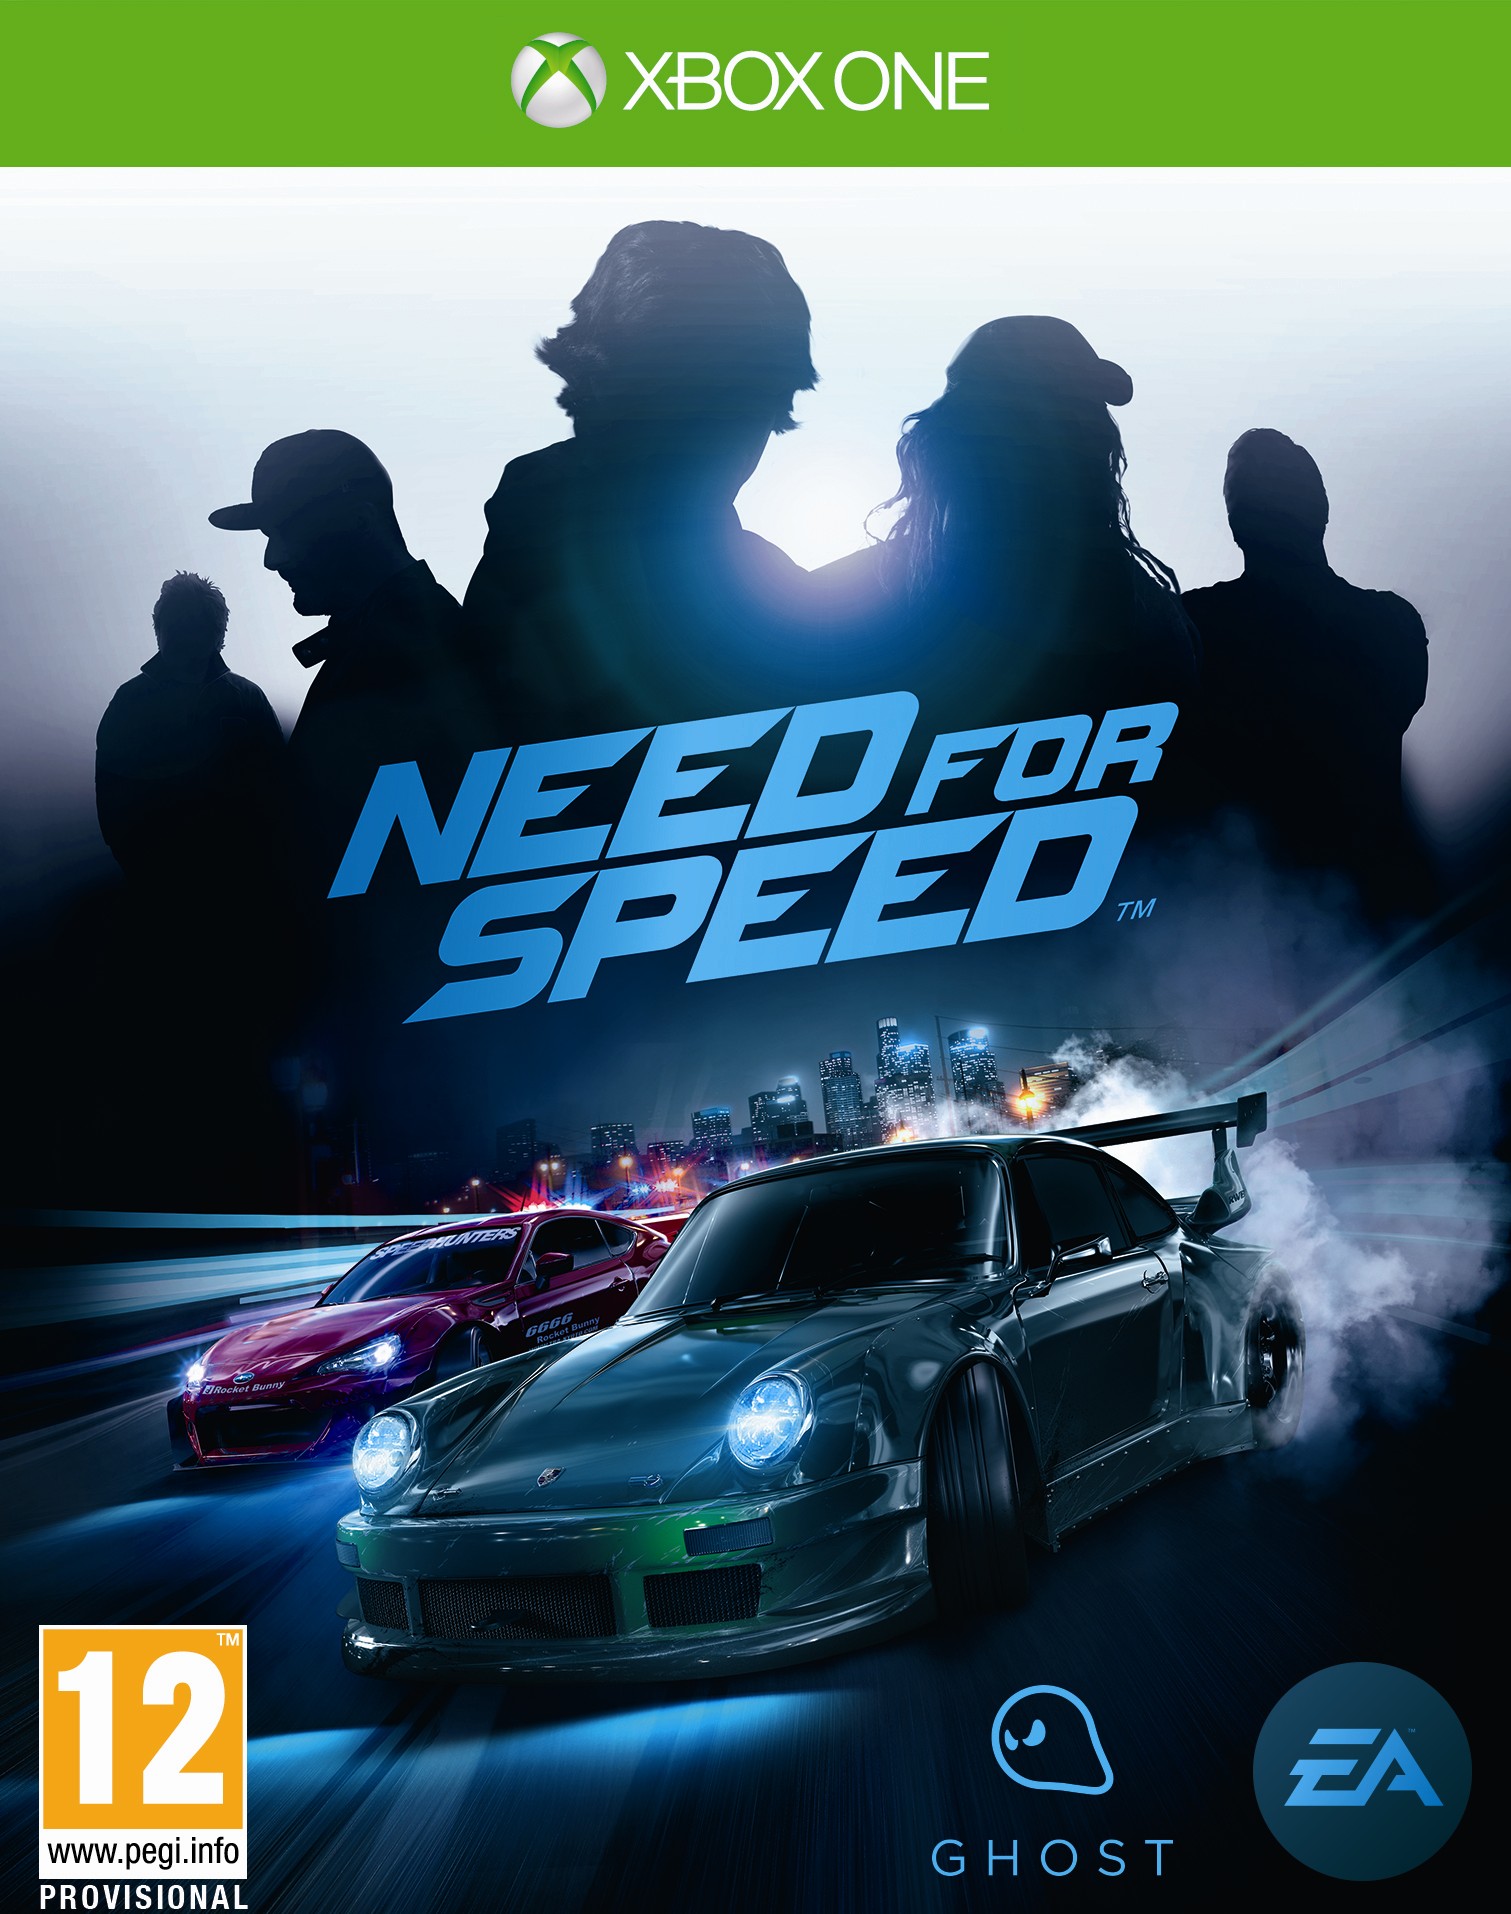 NEED FOR SPEED 2015 // XBOX ONE